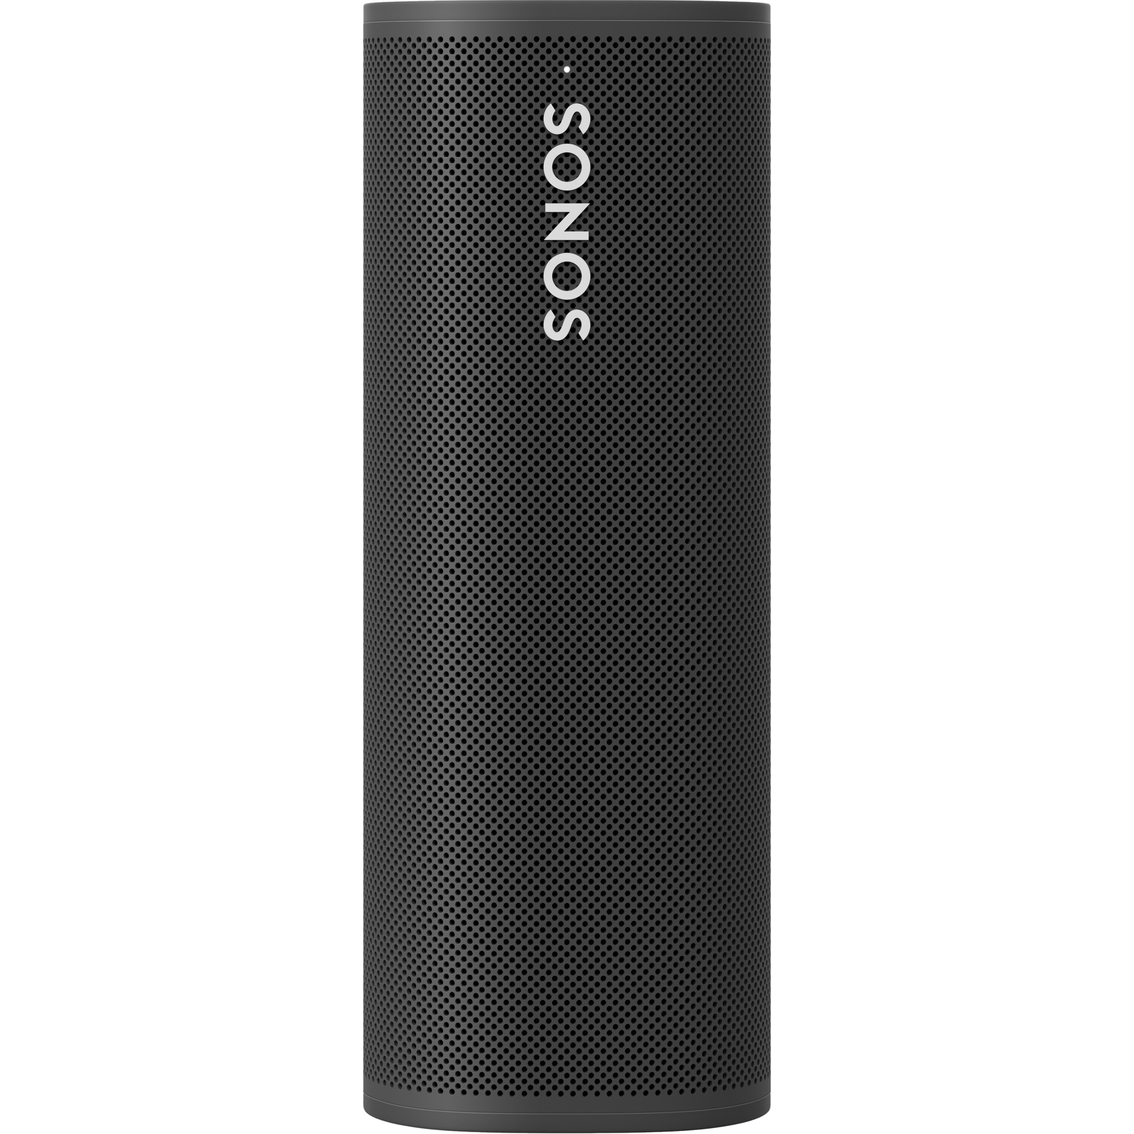 Sonos Roam Wireless Bluetooth Speaker with Built-in Smart Assistant - Image 1 of 3